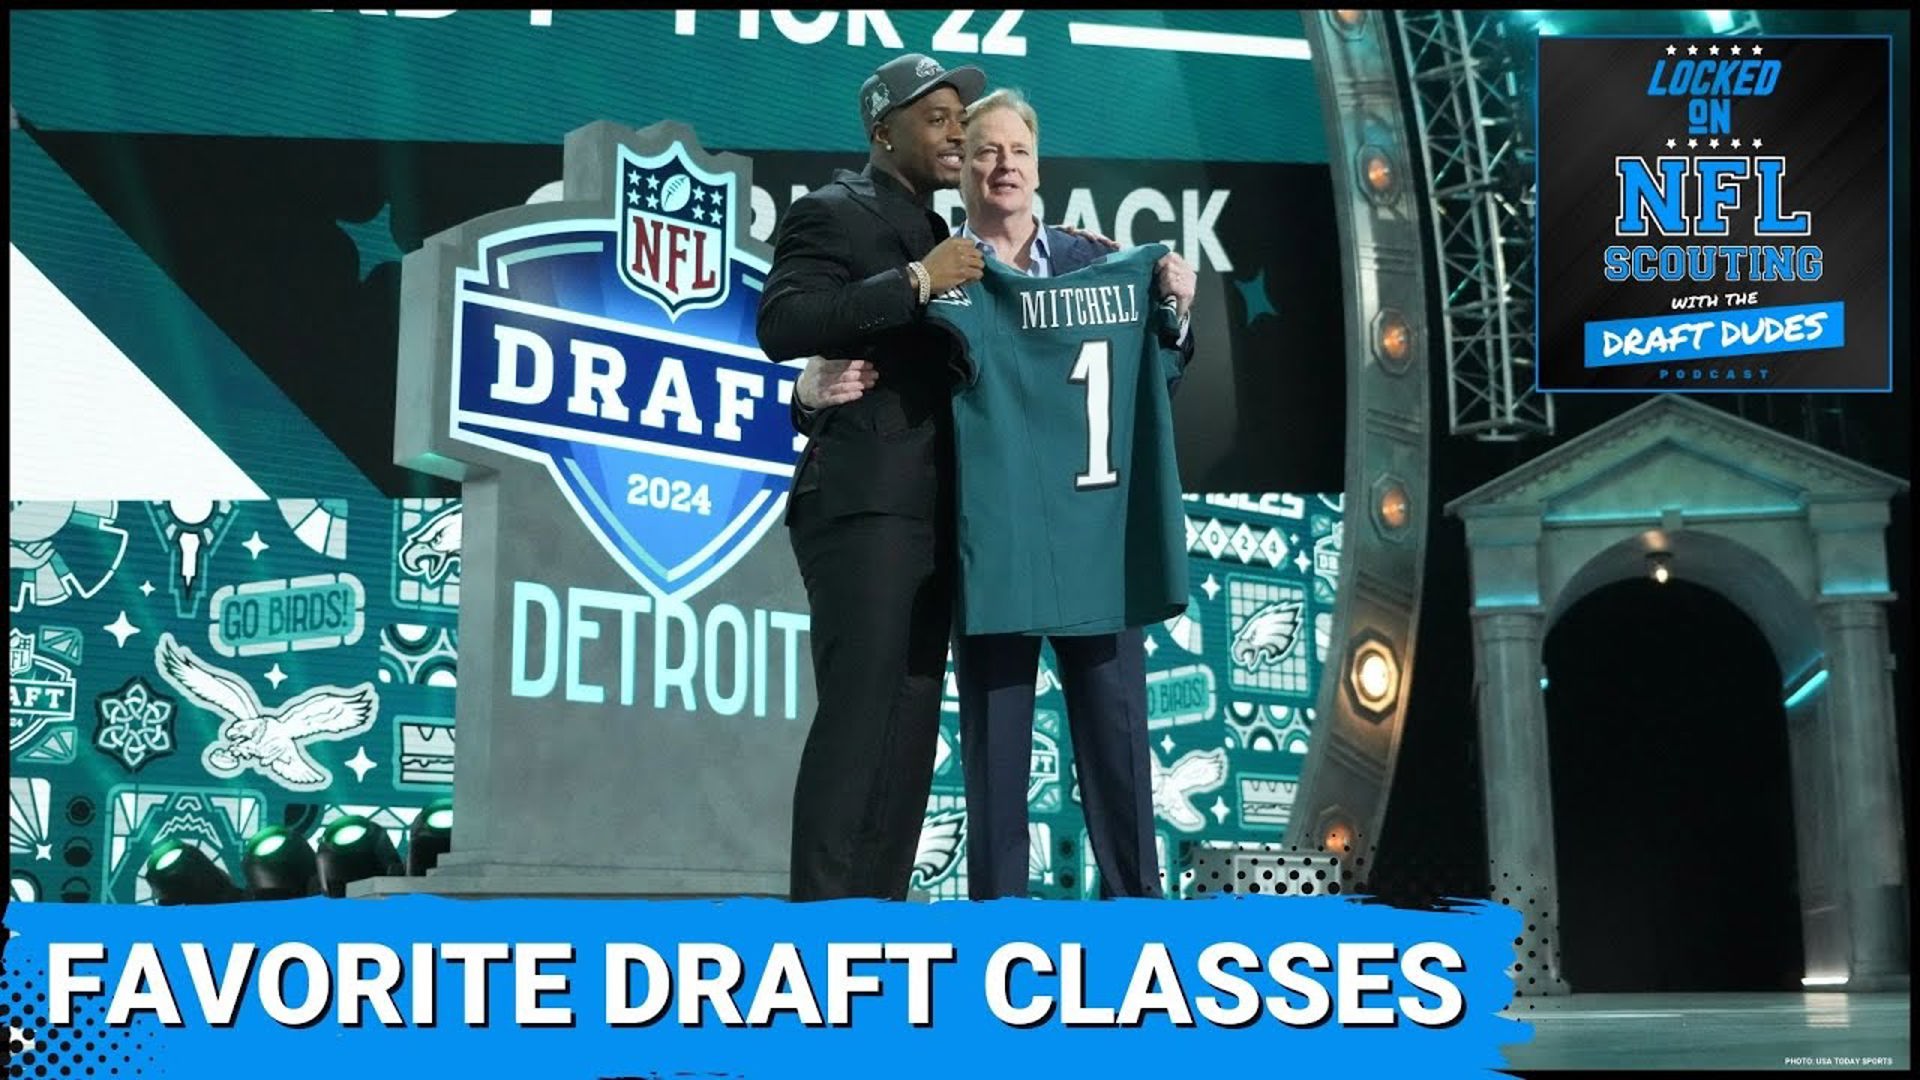 The 2024 NFL Draft is in the books so it’s time to consider which teams fared the best based on how they aligned with the Draft Dudes’ assessment of the prospects.